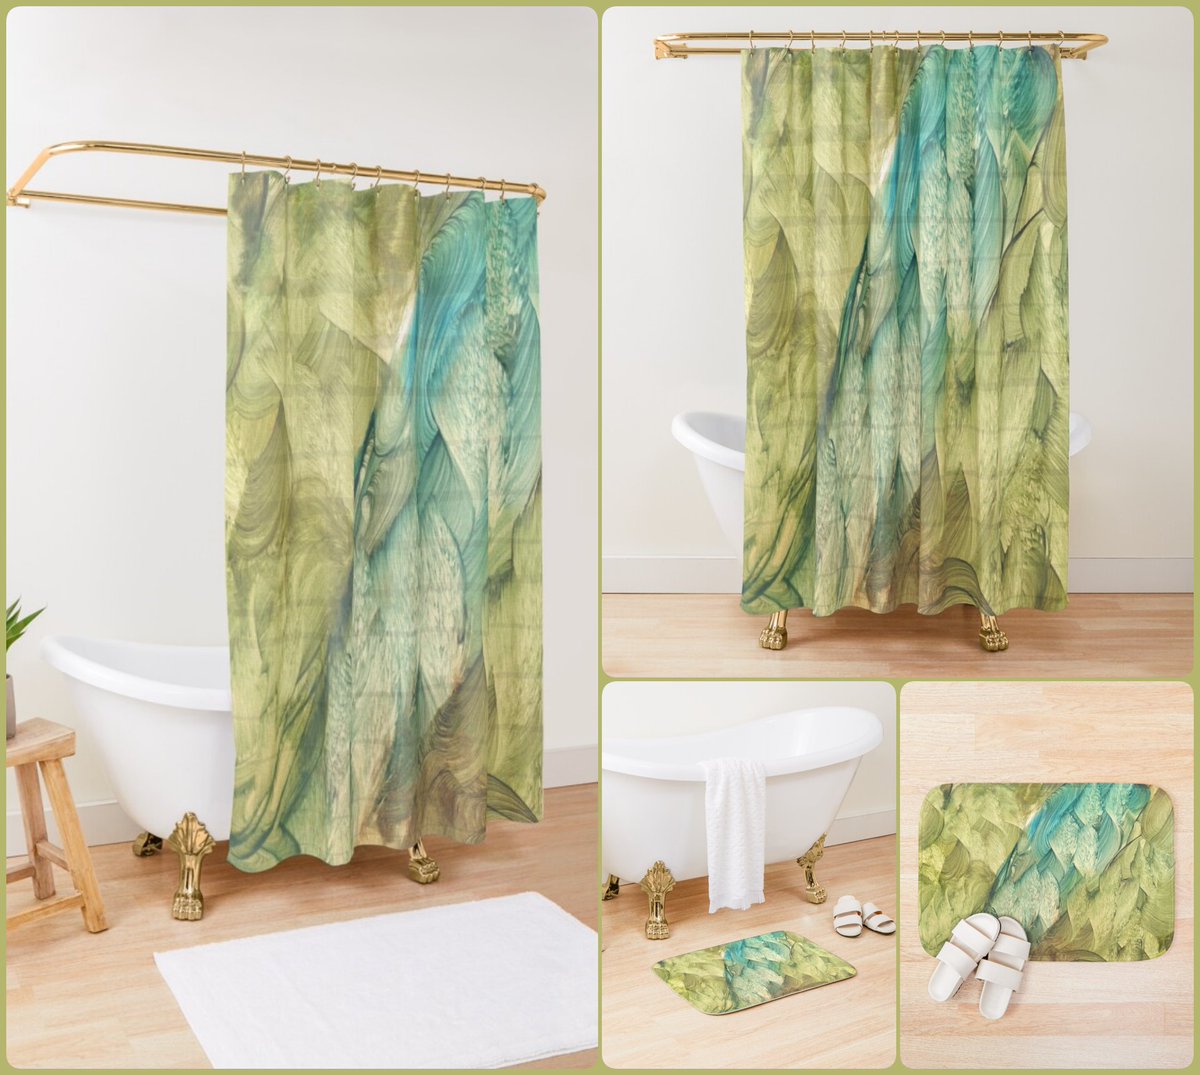 *SALE 25% Off*
Blue Symphony Shower Curtain~ by Art Falaxy
~Be Artful~ #accents #homedecor #art #artfalaxy #bathmats #blankets #comforters #duvets #pillows #redbubble #shower #trendy #modern #gifts #FindYourThing #teal #blue #green #yellow #golden

redbubble.com/i/shower-curta…